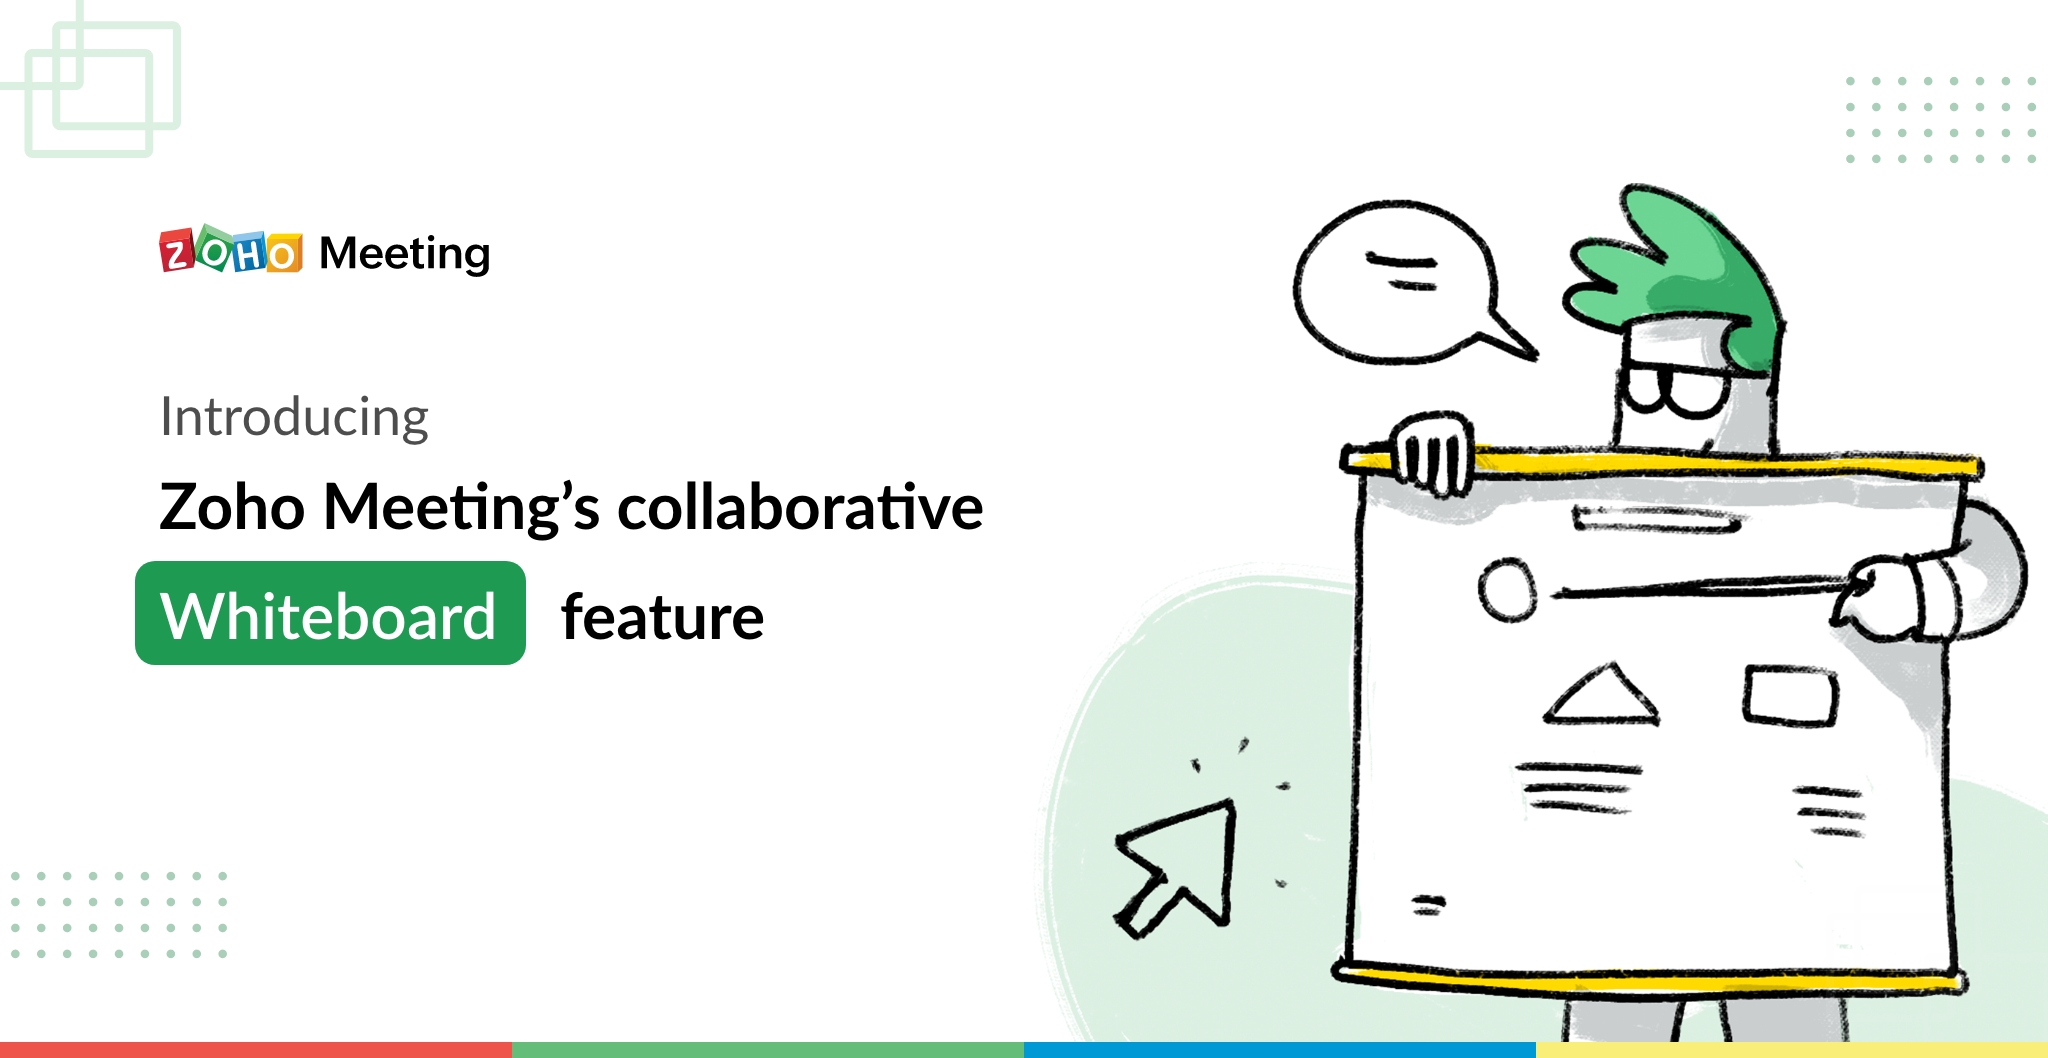 Introducing Zoho Meeting's collaborative Whiteboard feature!